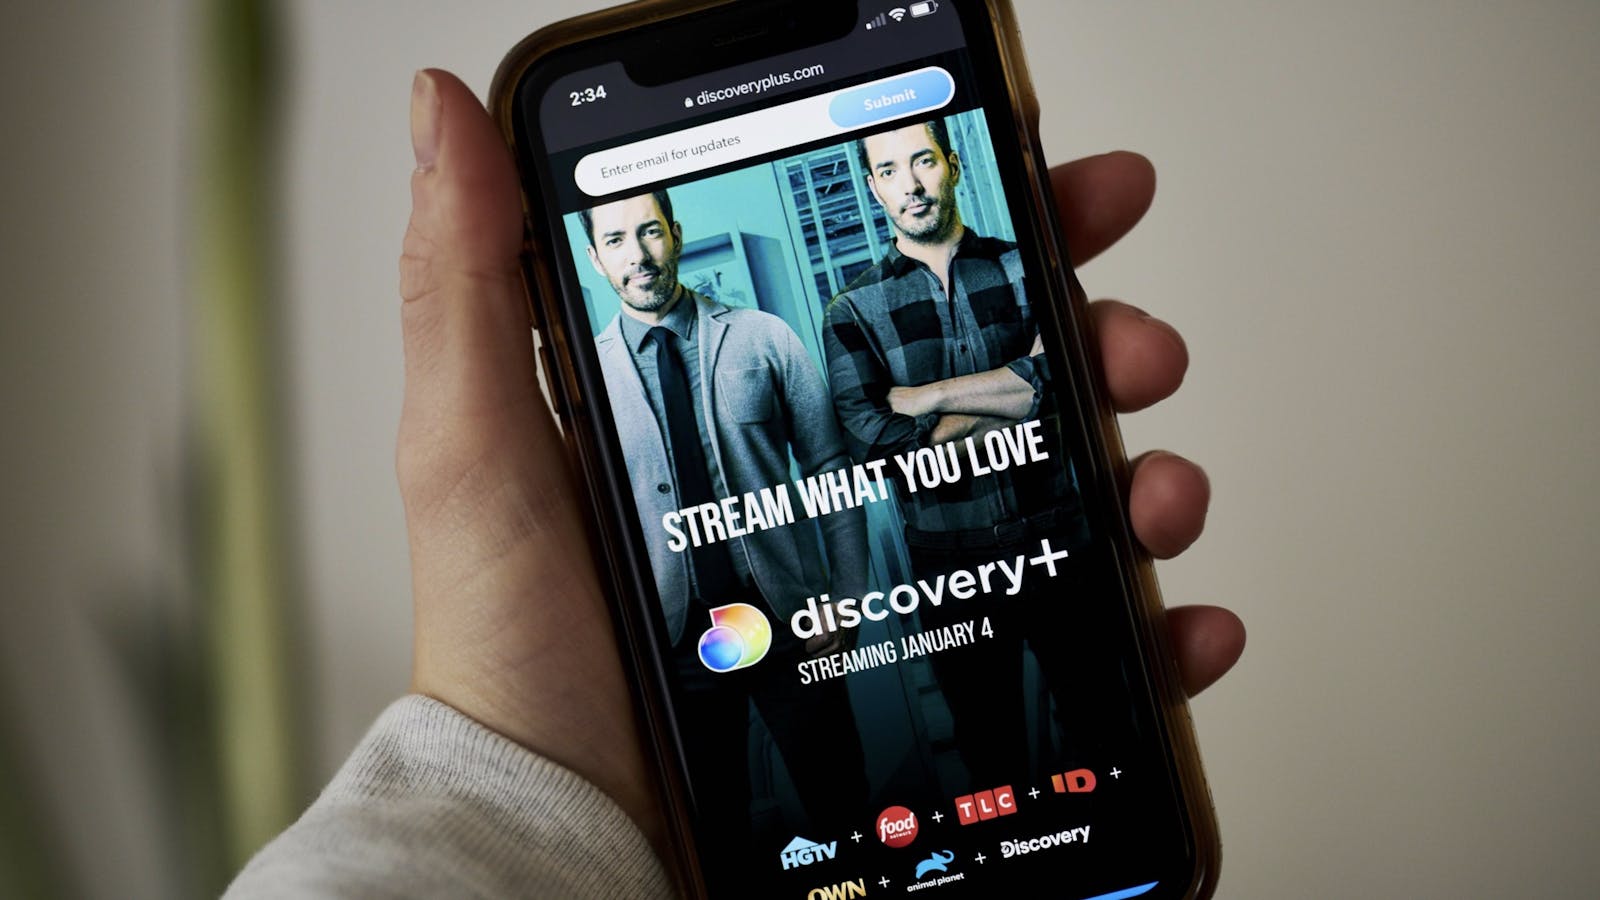 The Discovery+ home screen on a smartphone. Photo by Bloomberg